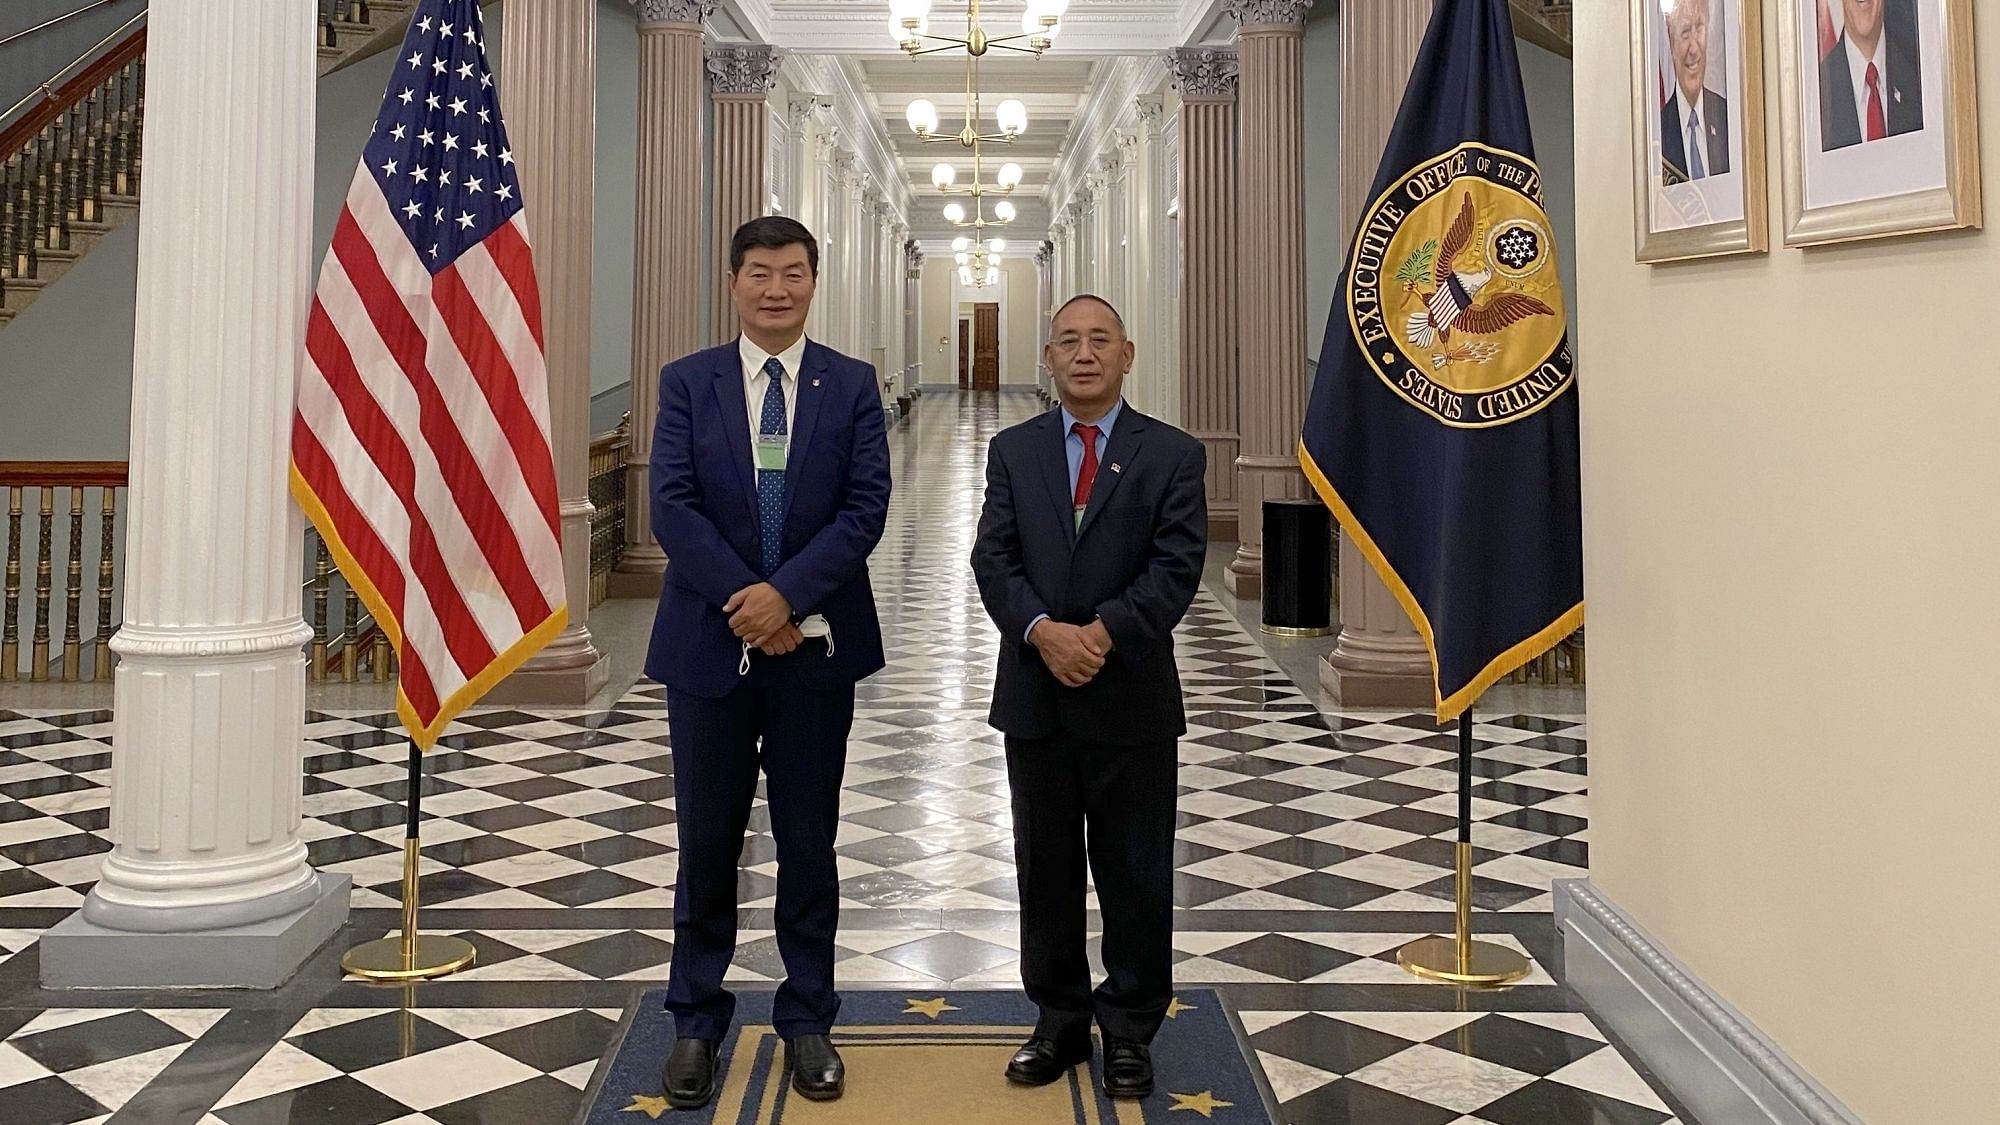 Central Tibetan Administration (CTA) President Lobsang Sangay (left) and his office representative Ngodup Tsering outside the White House compound after the crucial meeting in Dharamsala, Himachal Pradesh on November 21, 2020.